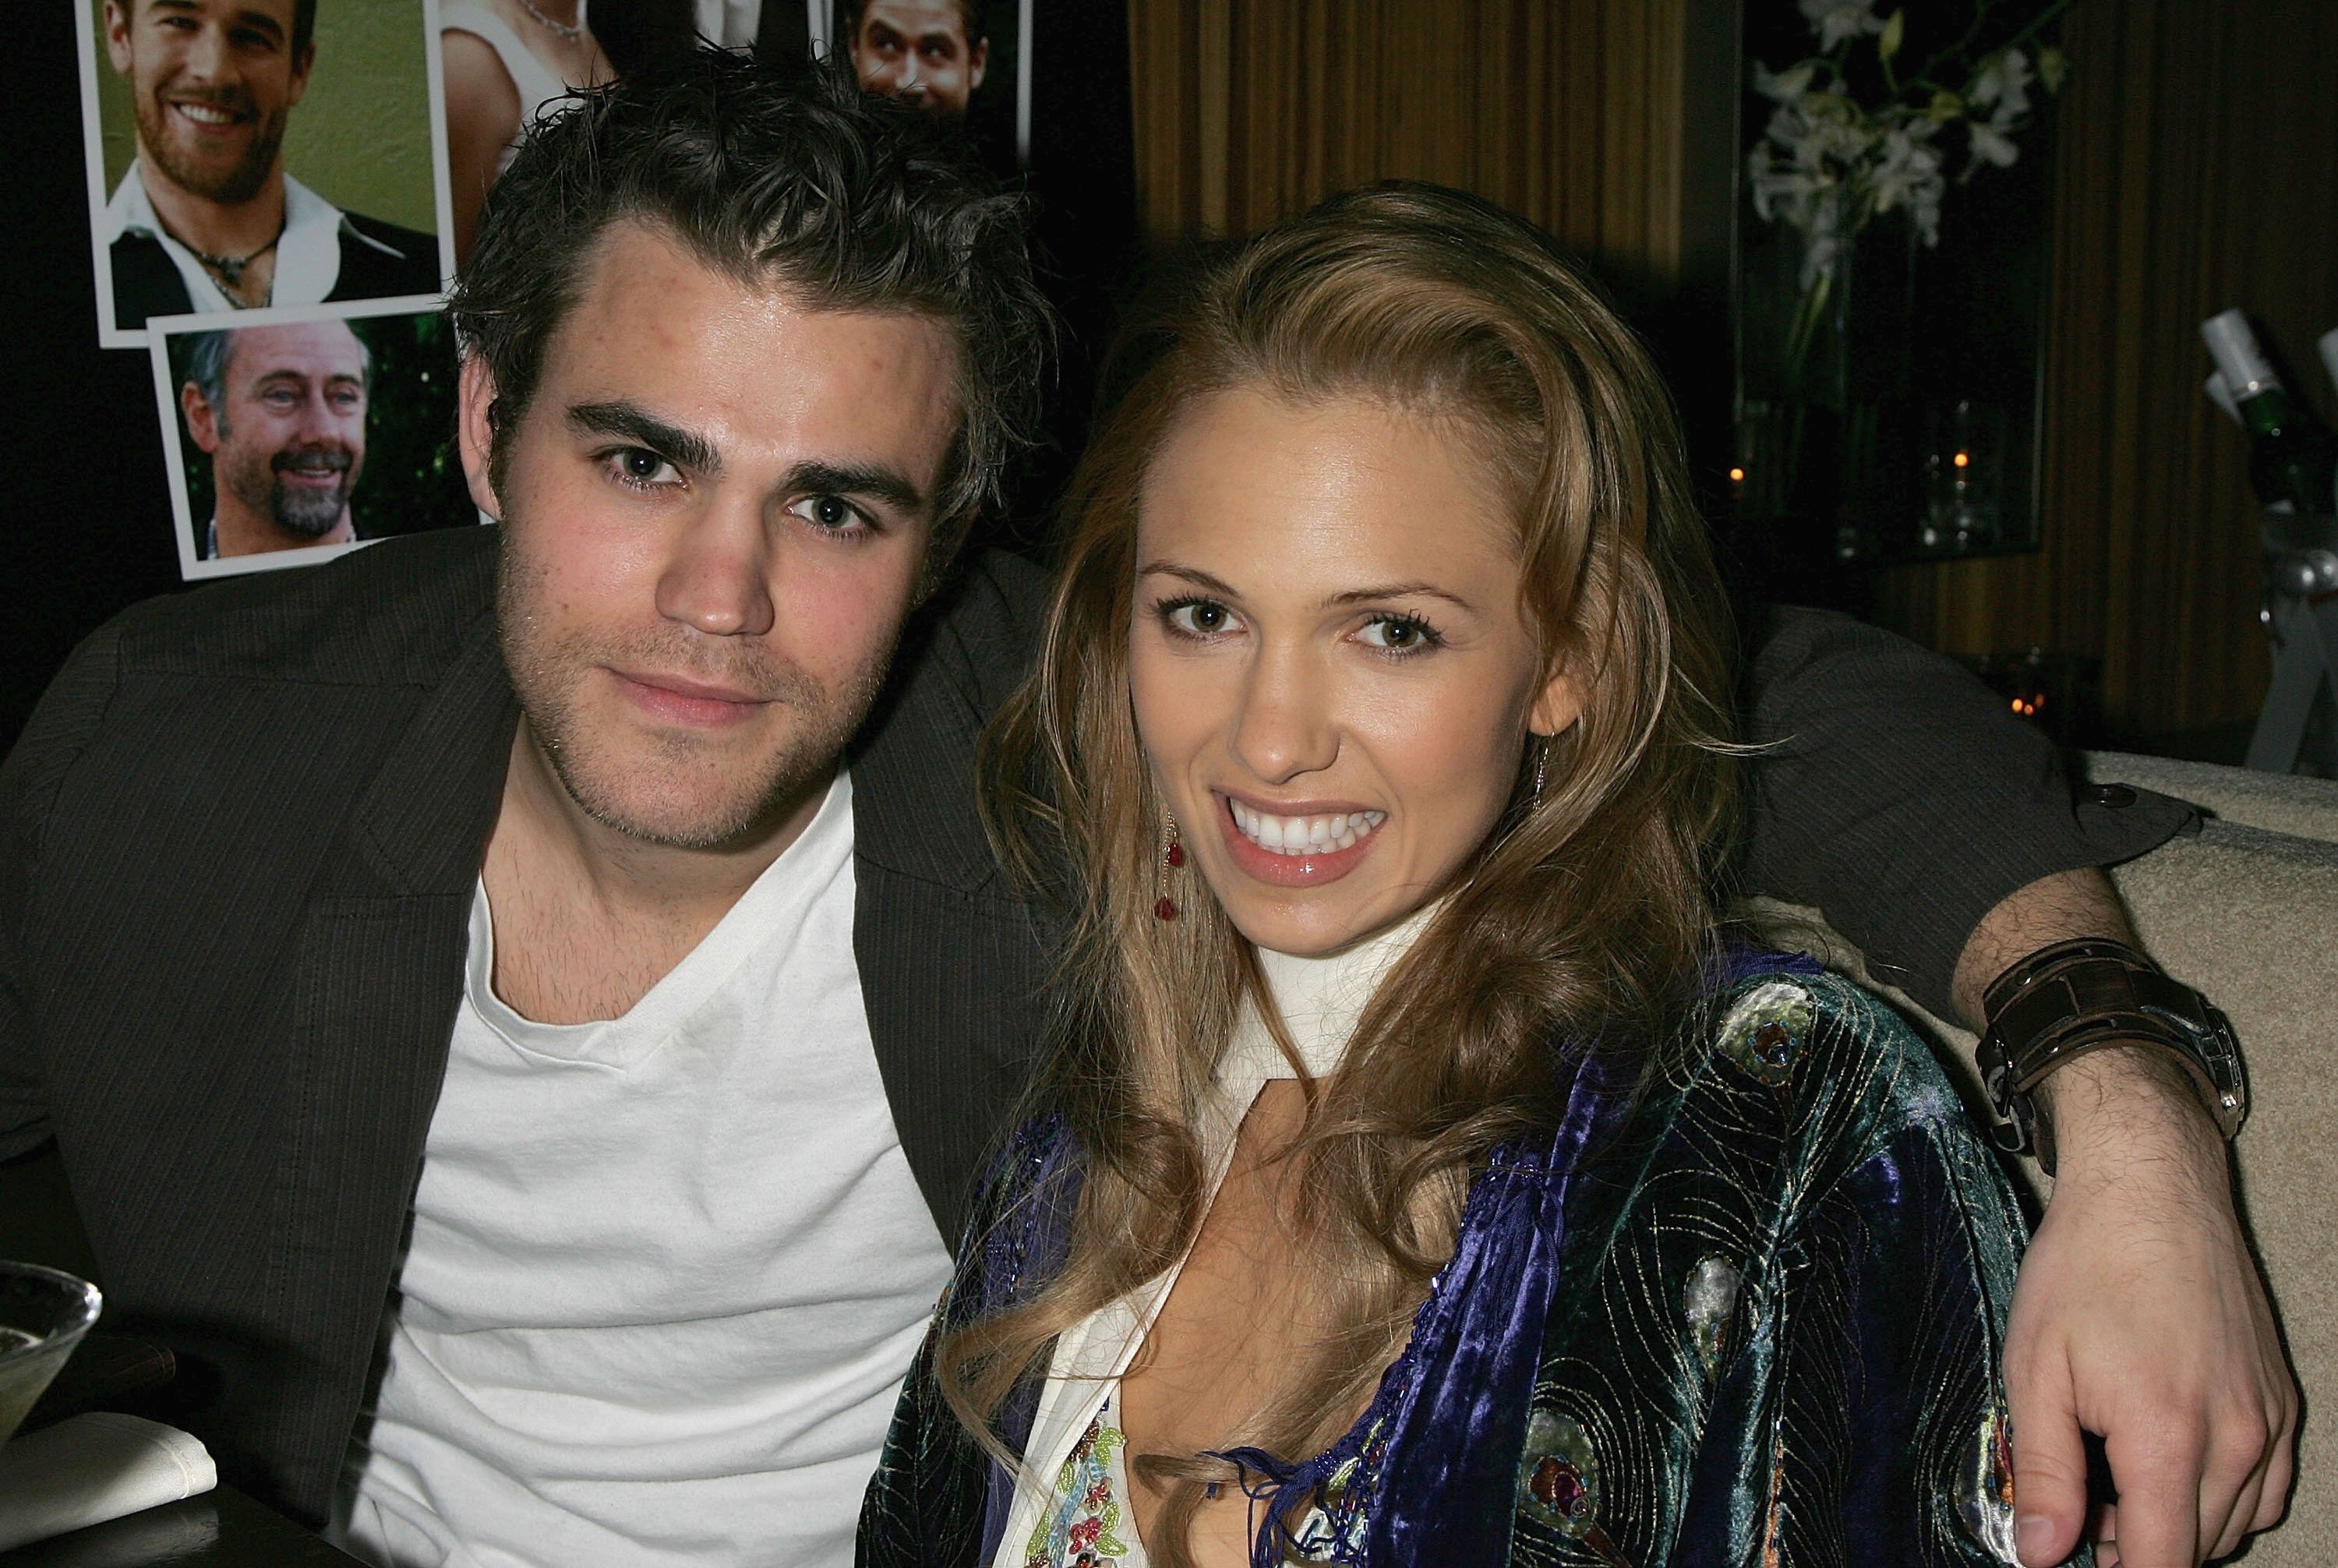 Actors Paul Wesley and Marnette Patterson attend the after party following the premiere of "Standing Still" on April 10, 2006 in Hollywood, California. I Source: Getty Images